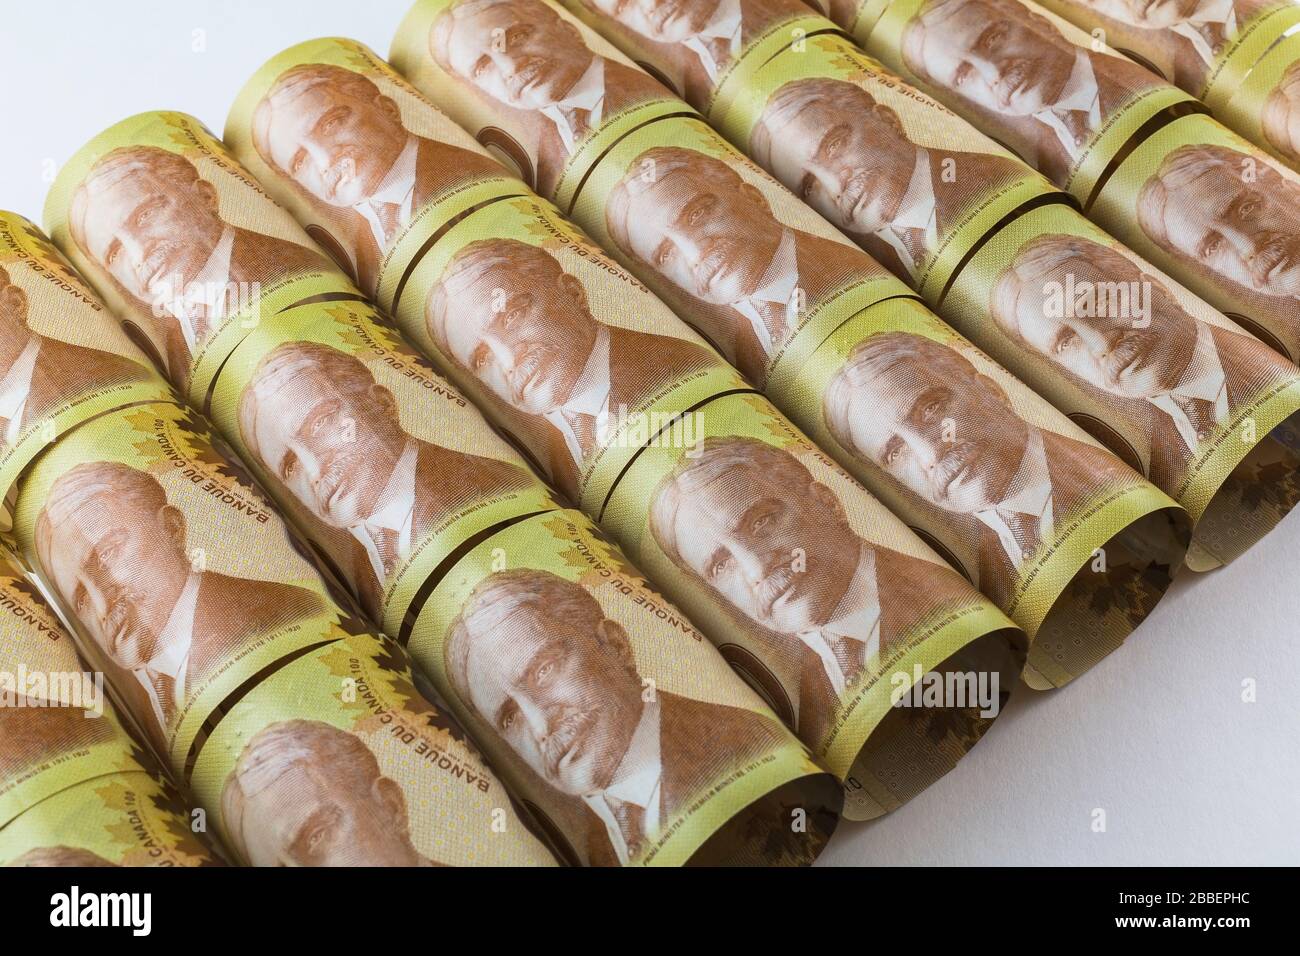 Top view of bunch of rolled up and laid flat Canadian one hundred dollar banknotes with portrait of Sir Robert L. Borden former Prime Minister of Canada, Studio Composition, Quebec, Canada Stock Photo